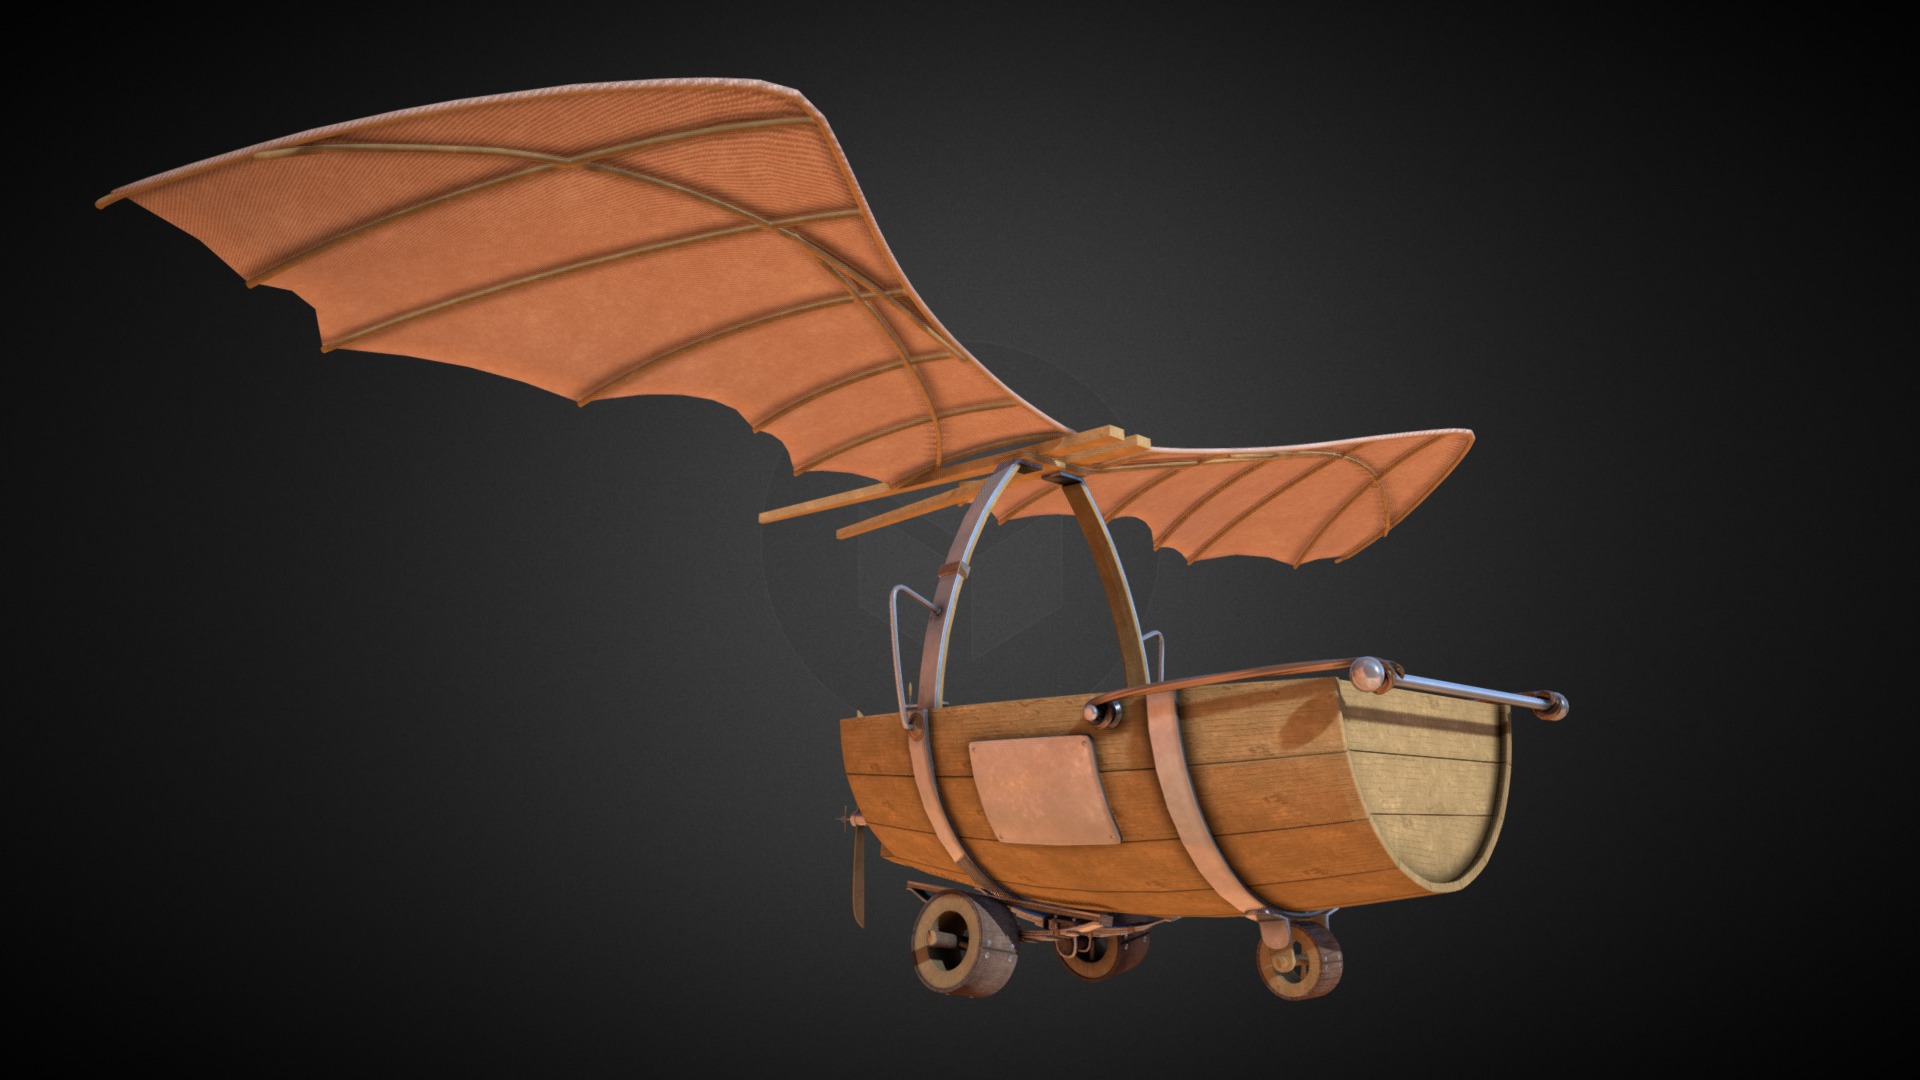 3D model Bote volador - This is a 3D model of the Bote volador. The 3D model is about a brown and tan chair.